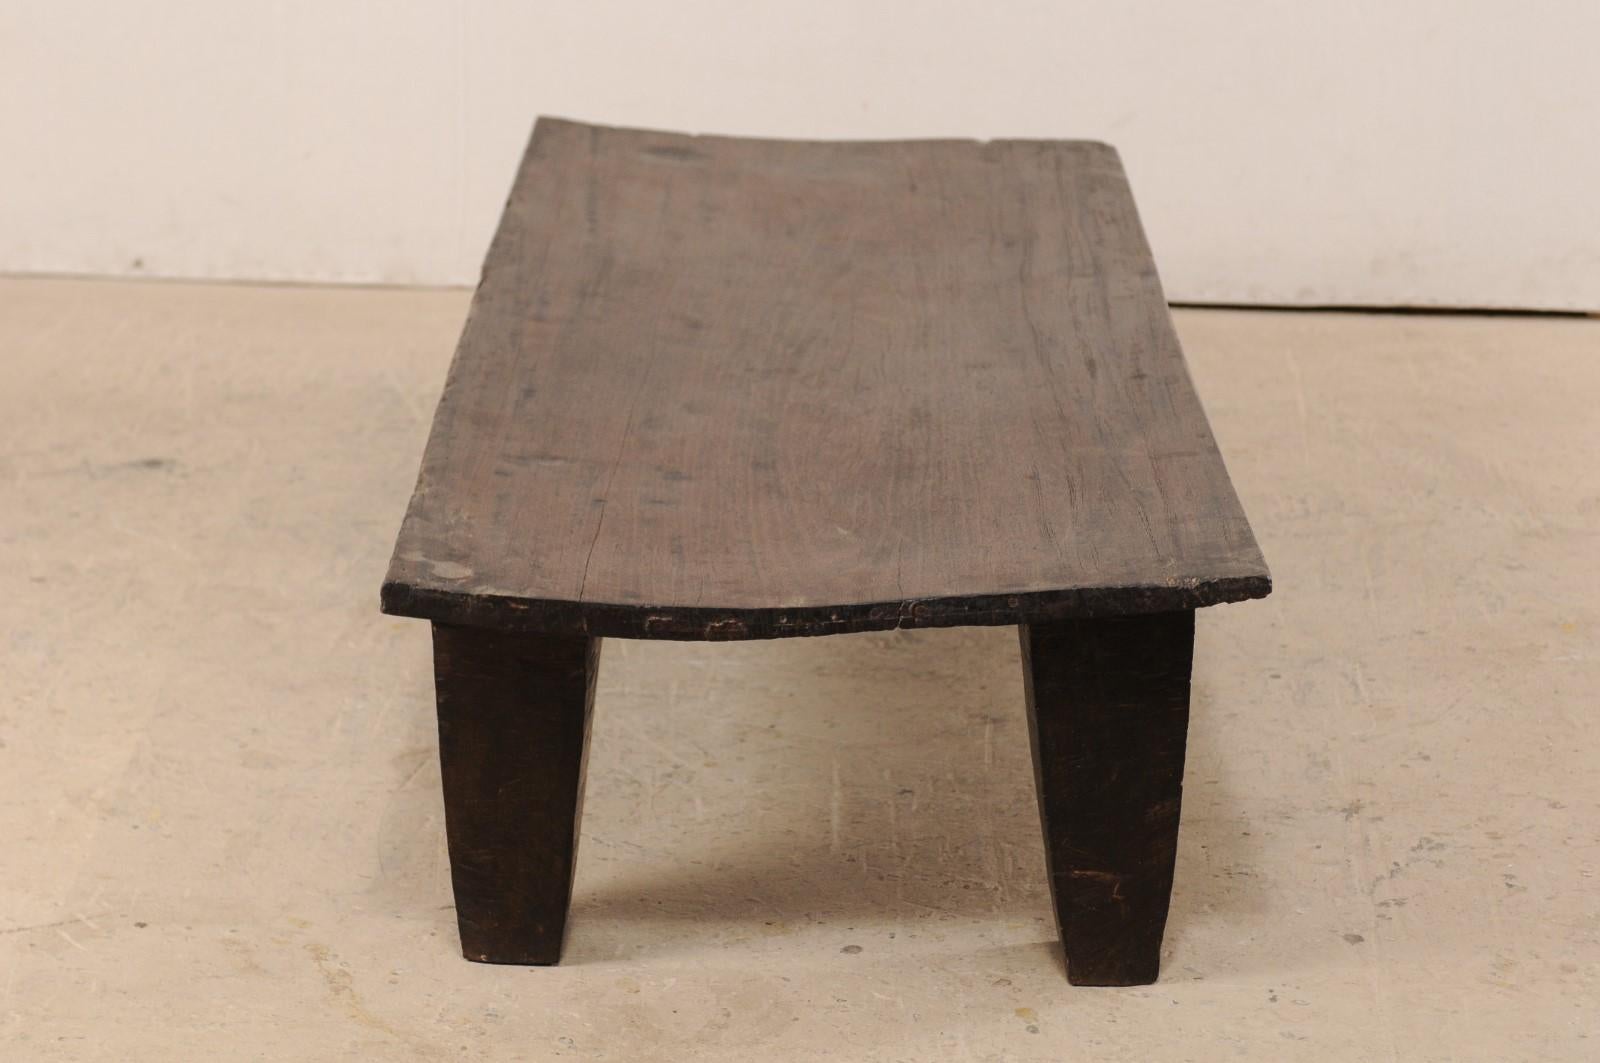 Rustic Naga Wood Coffee Table or Bench from the Early 20th Century